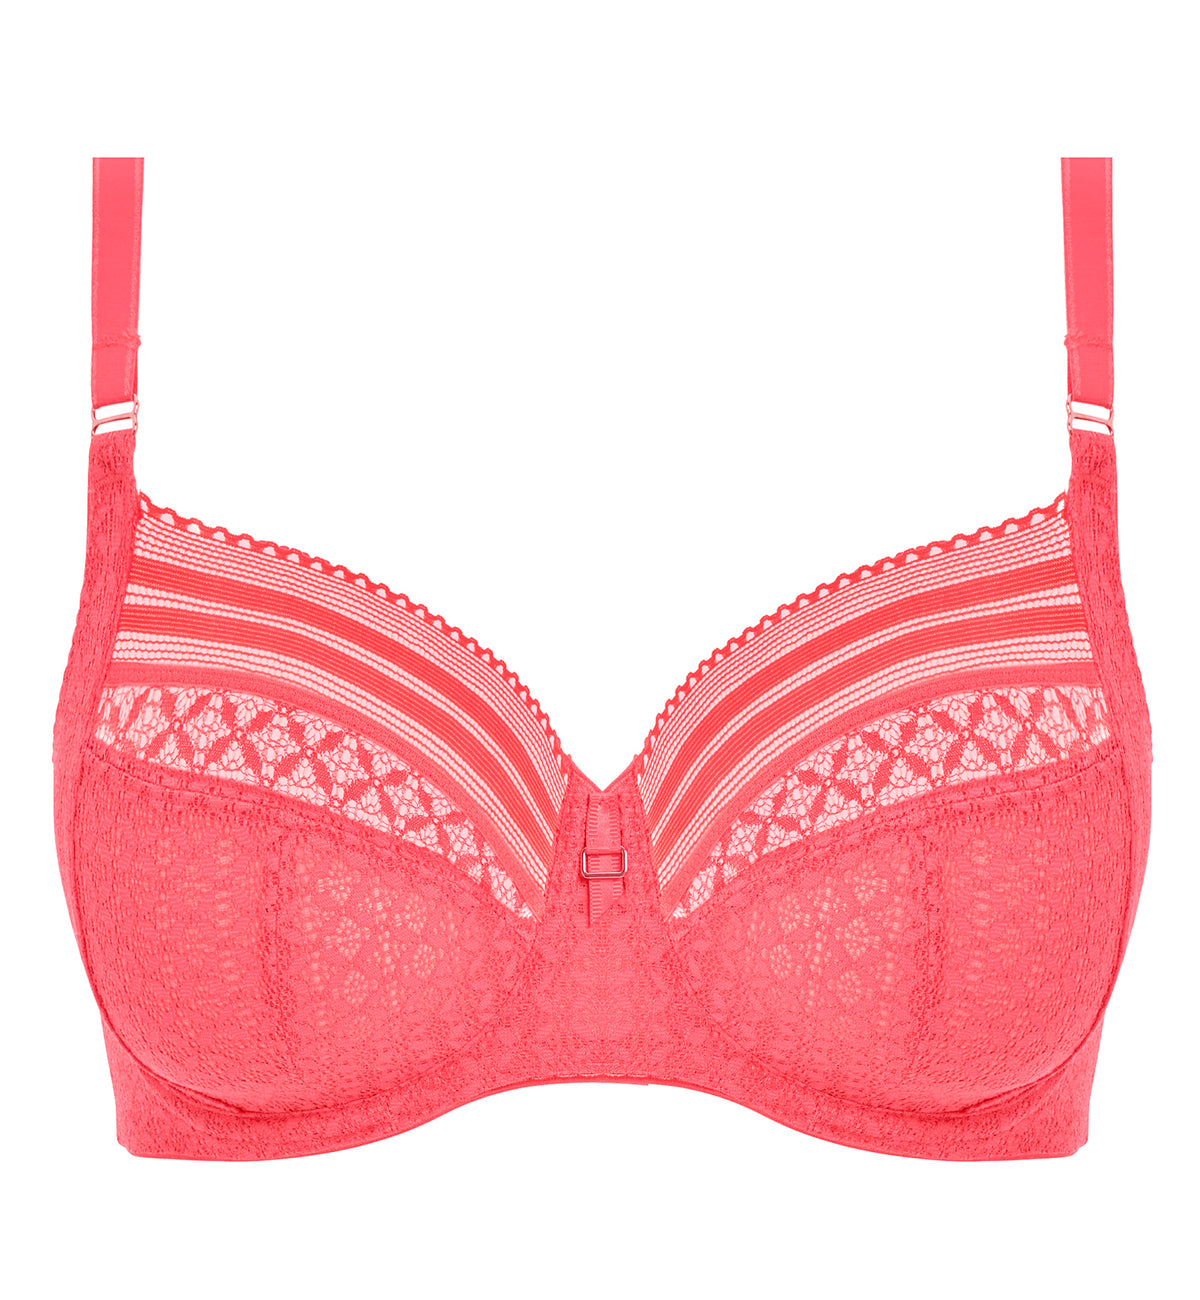 Freya Viva Side Support Underwire Bra (5641),28F,Sunkissed Coral - Sunkissed Coral,28F